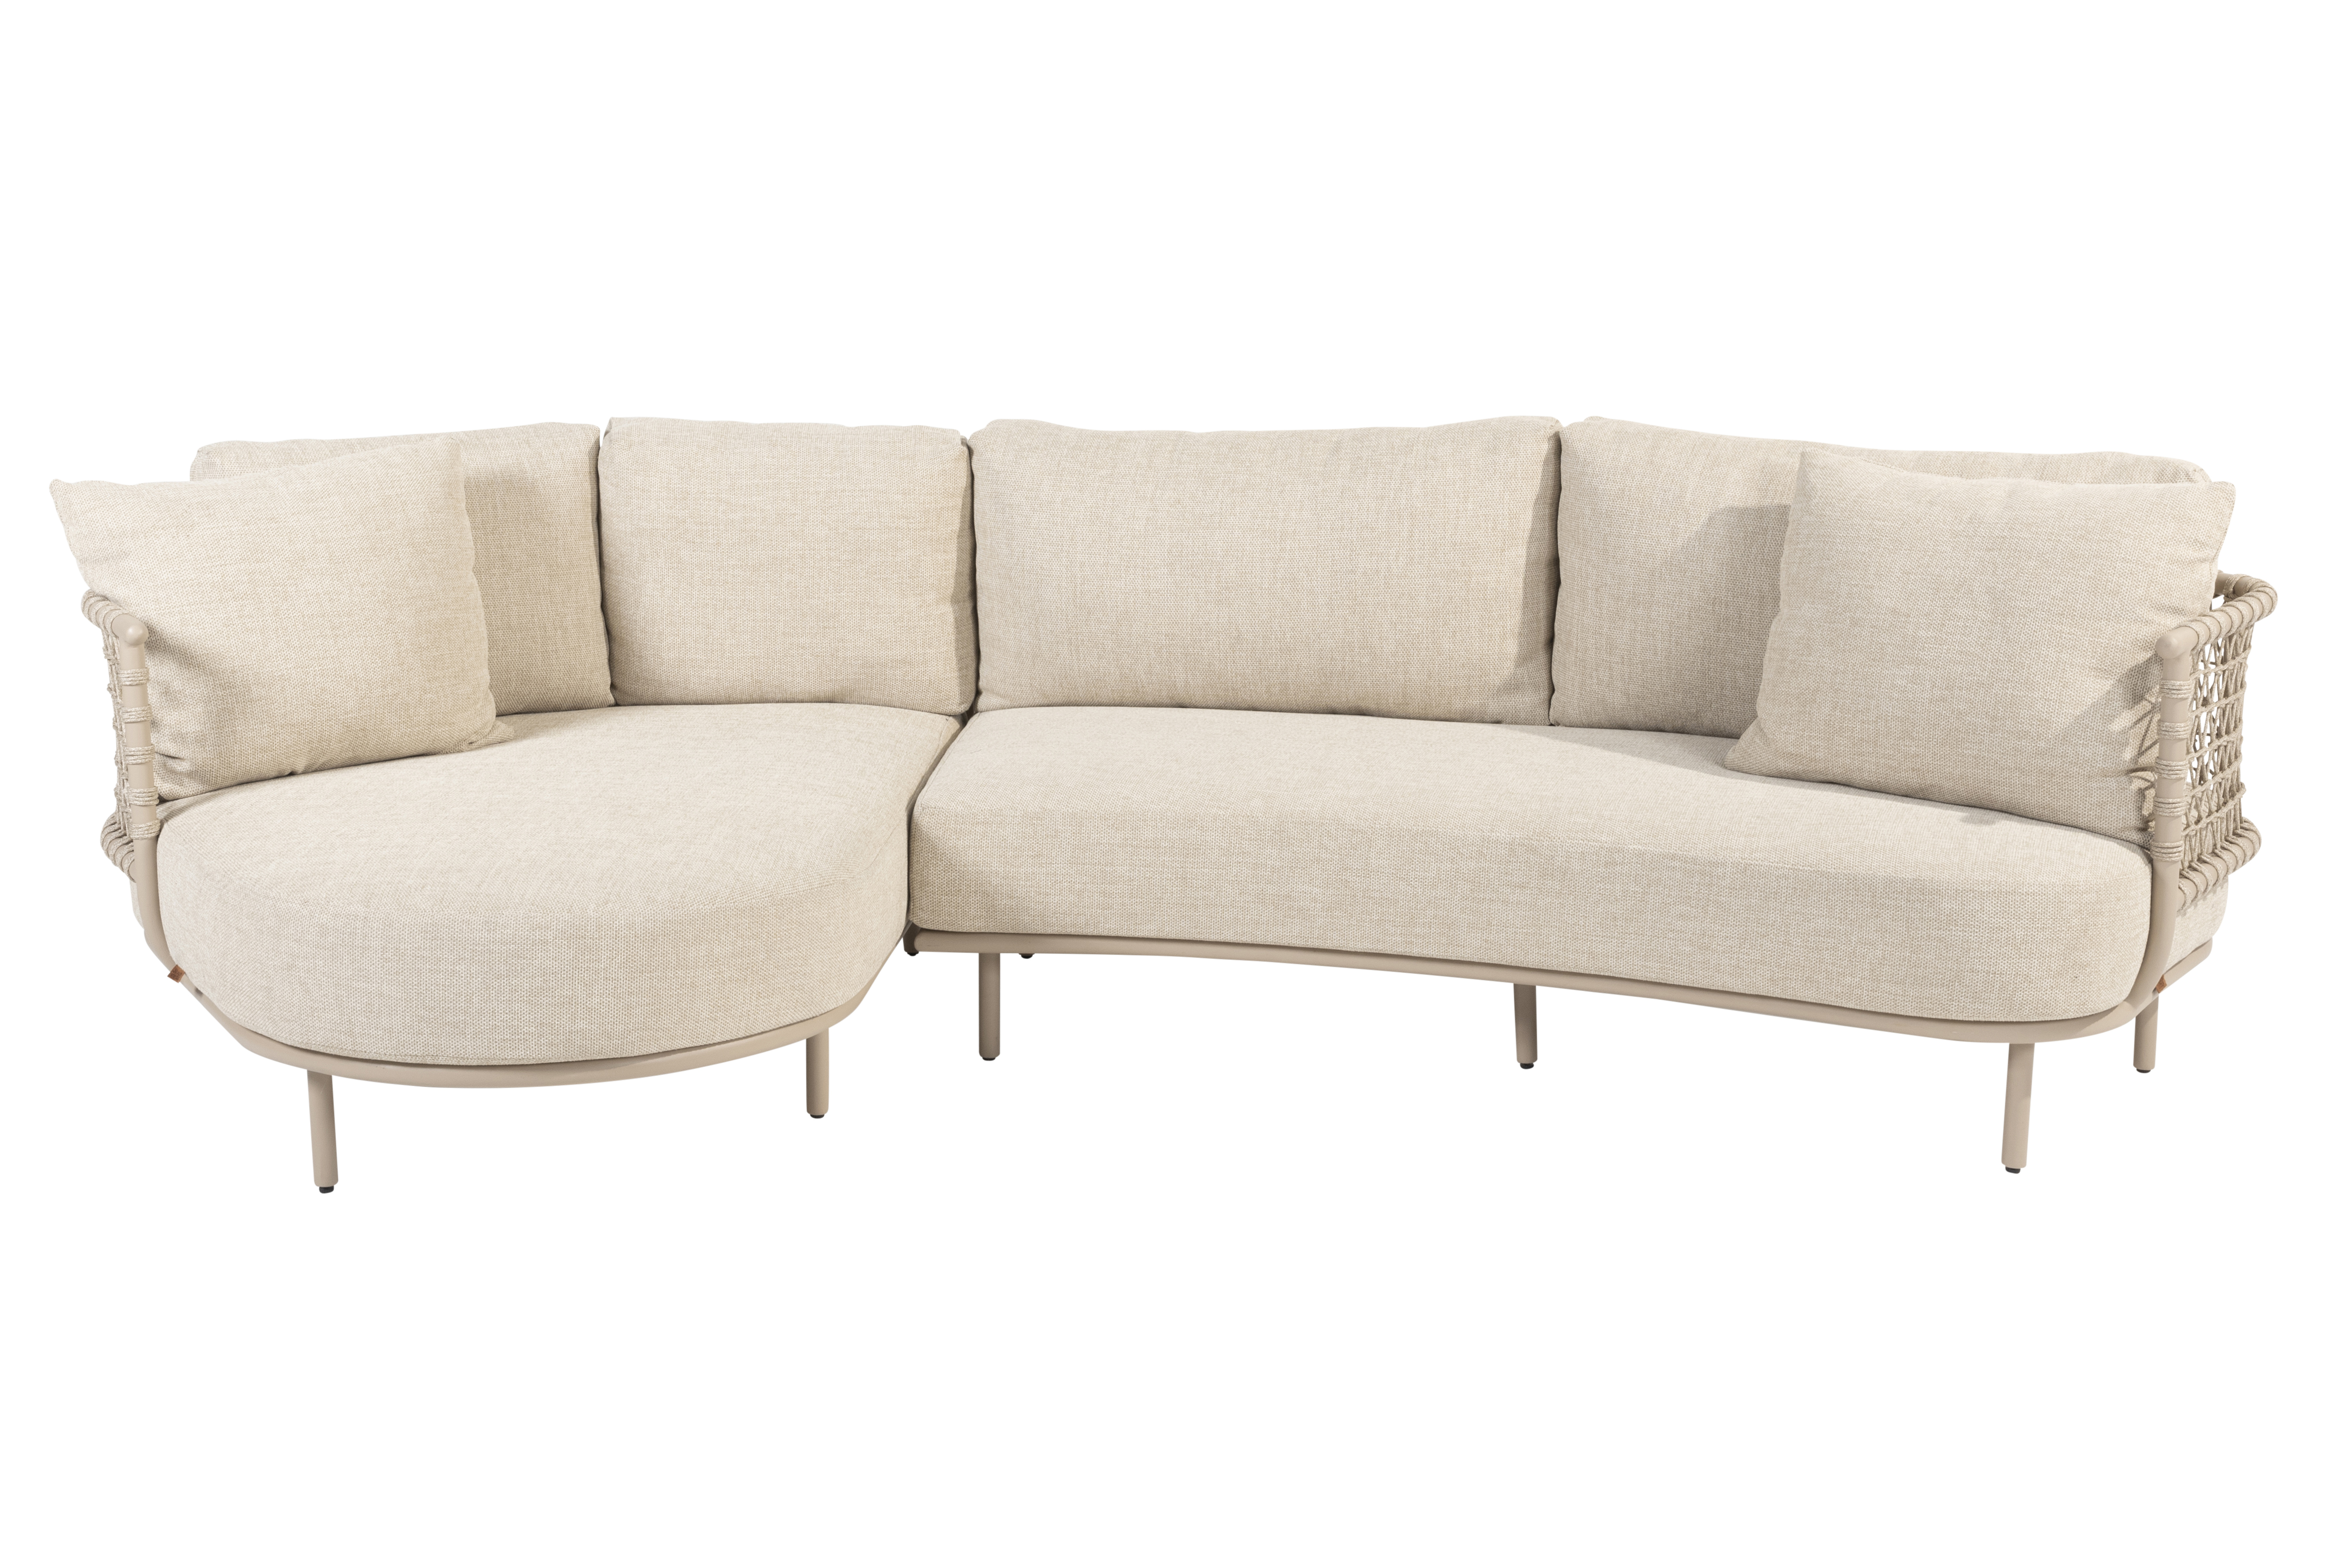 214041-214042_ Sardinia chaise lounge living sofa without table _01